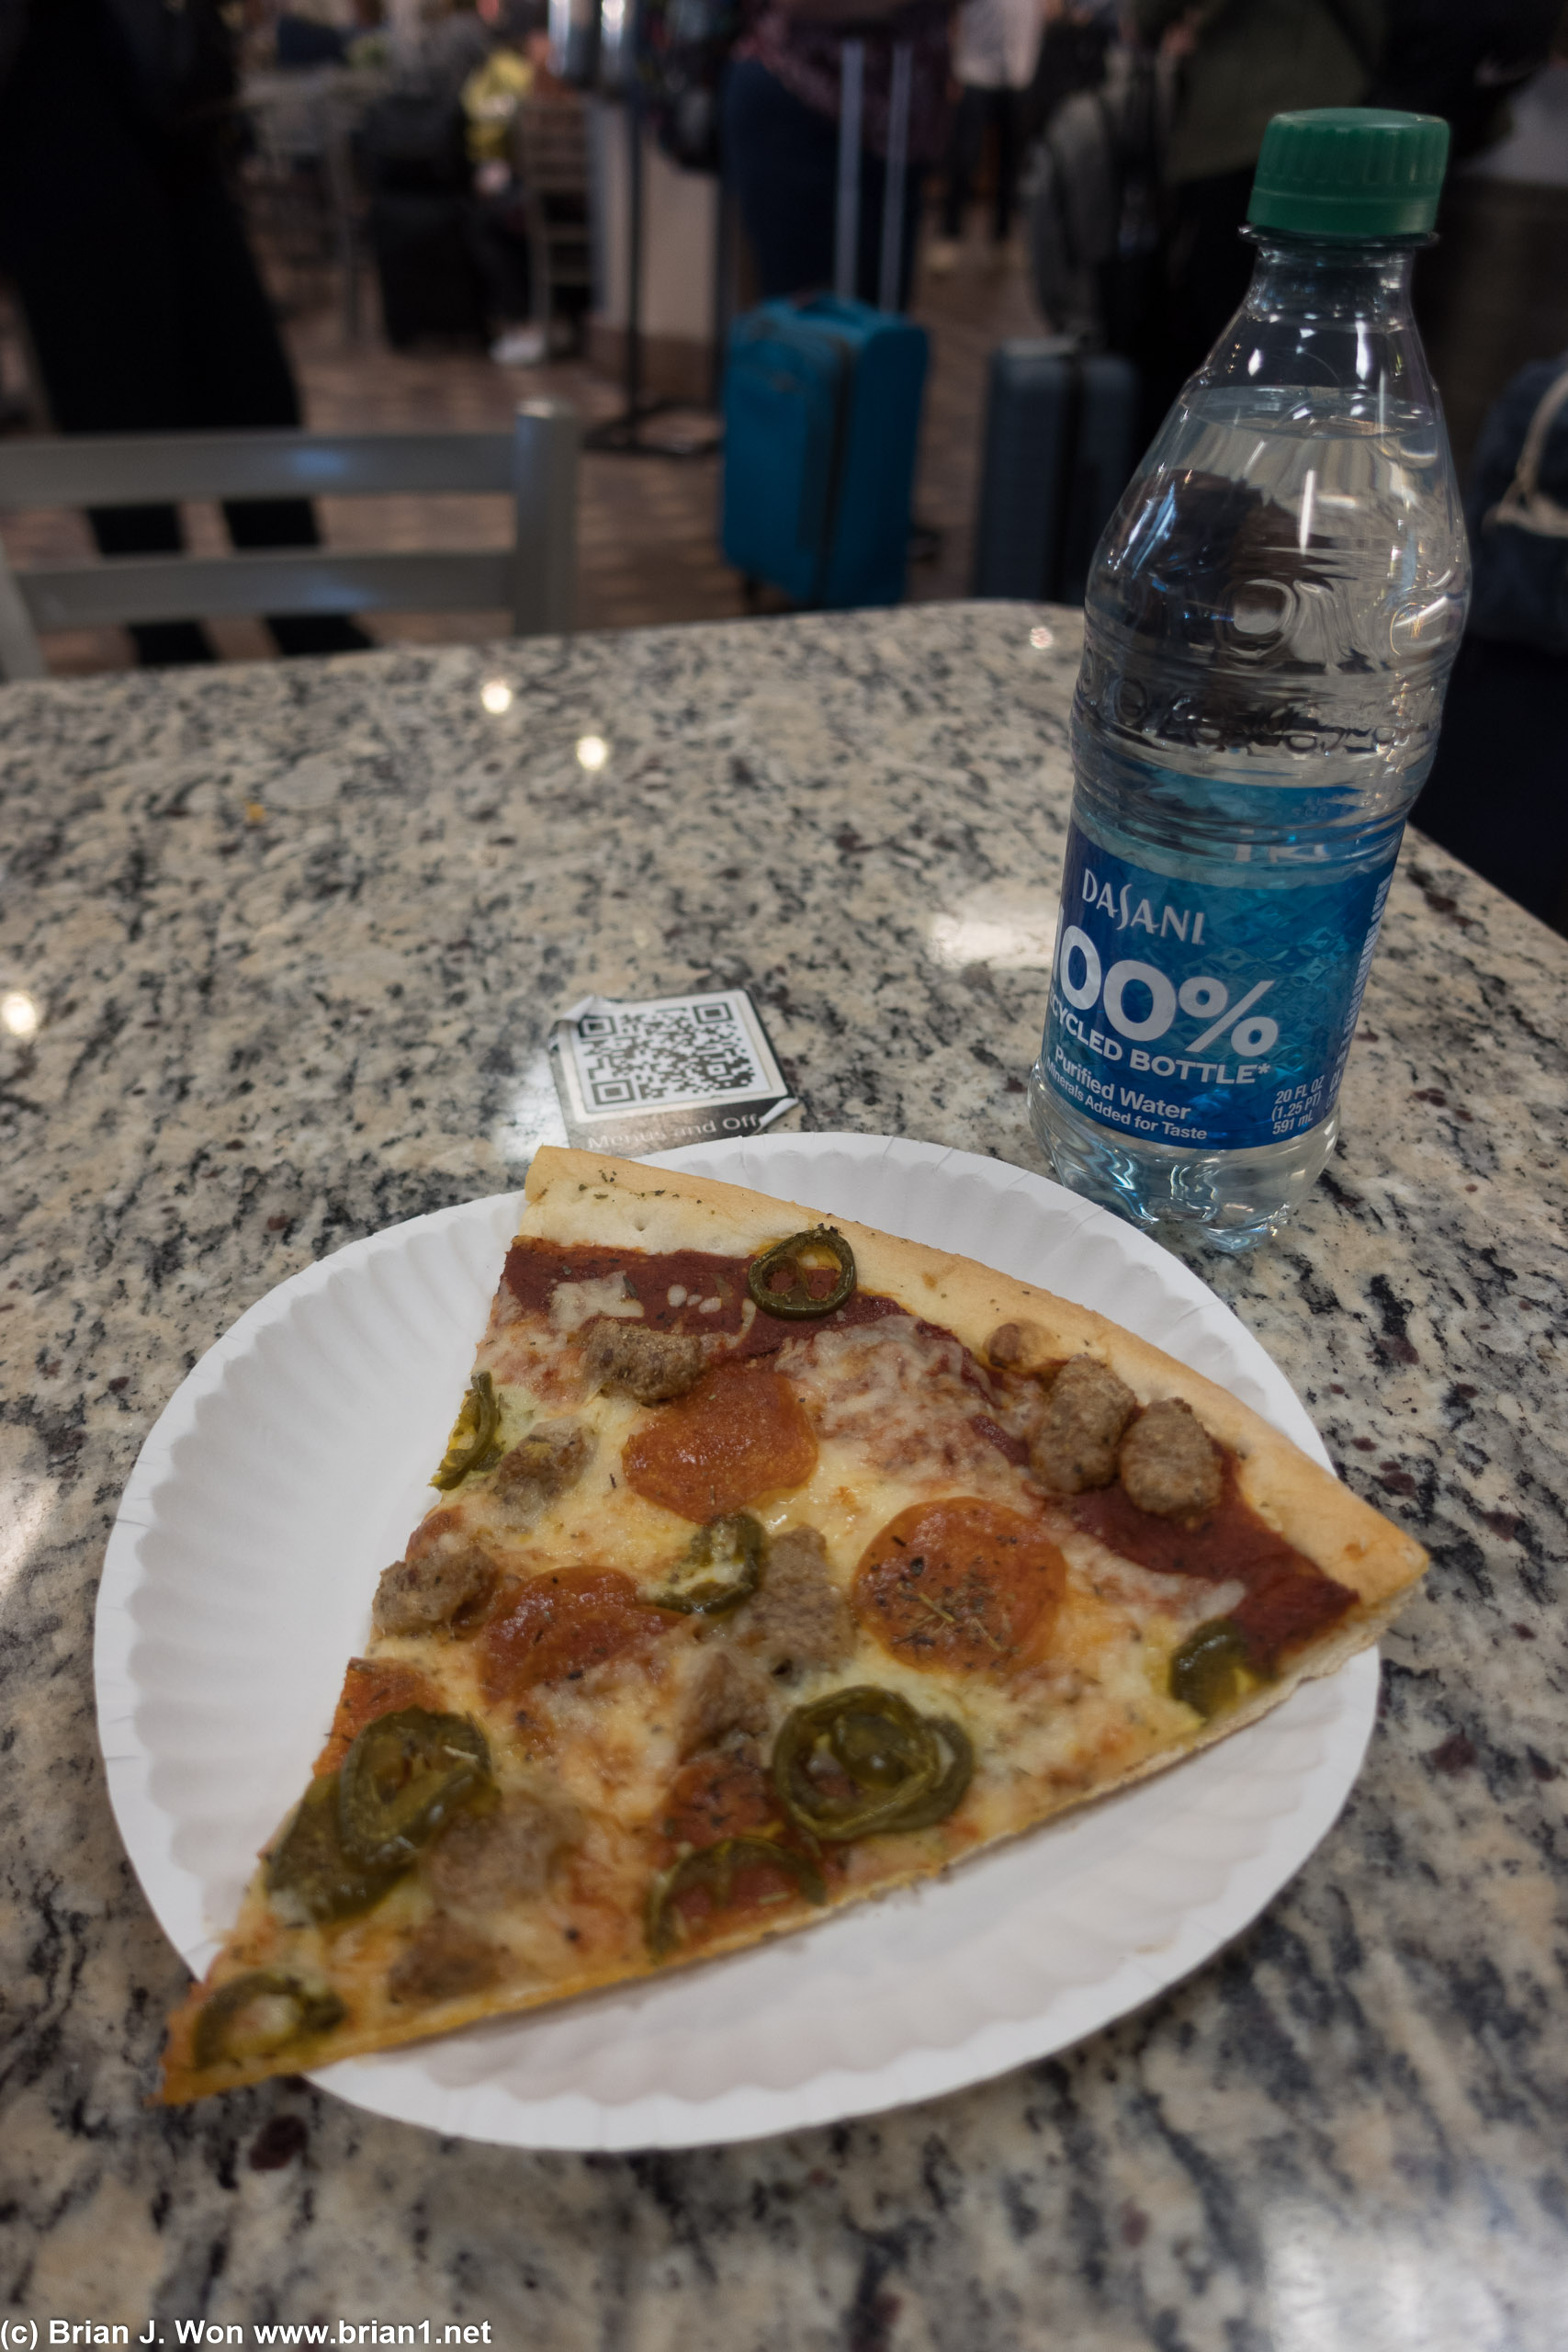 Crappy pizza at the airport. Crust was awful.